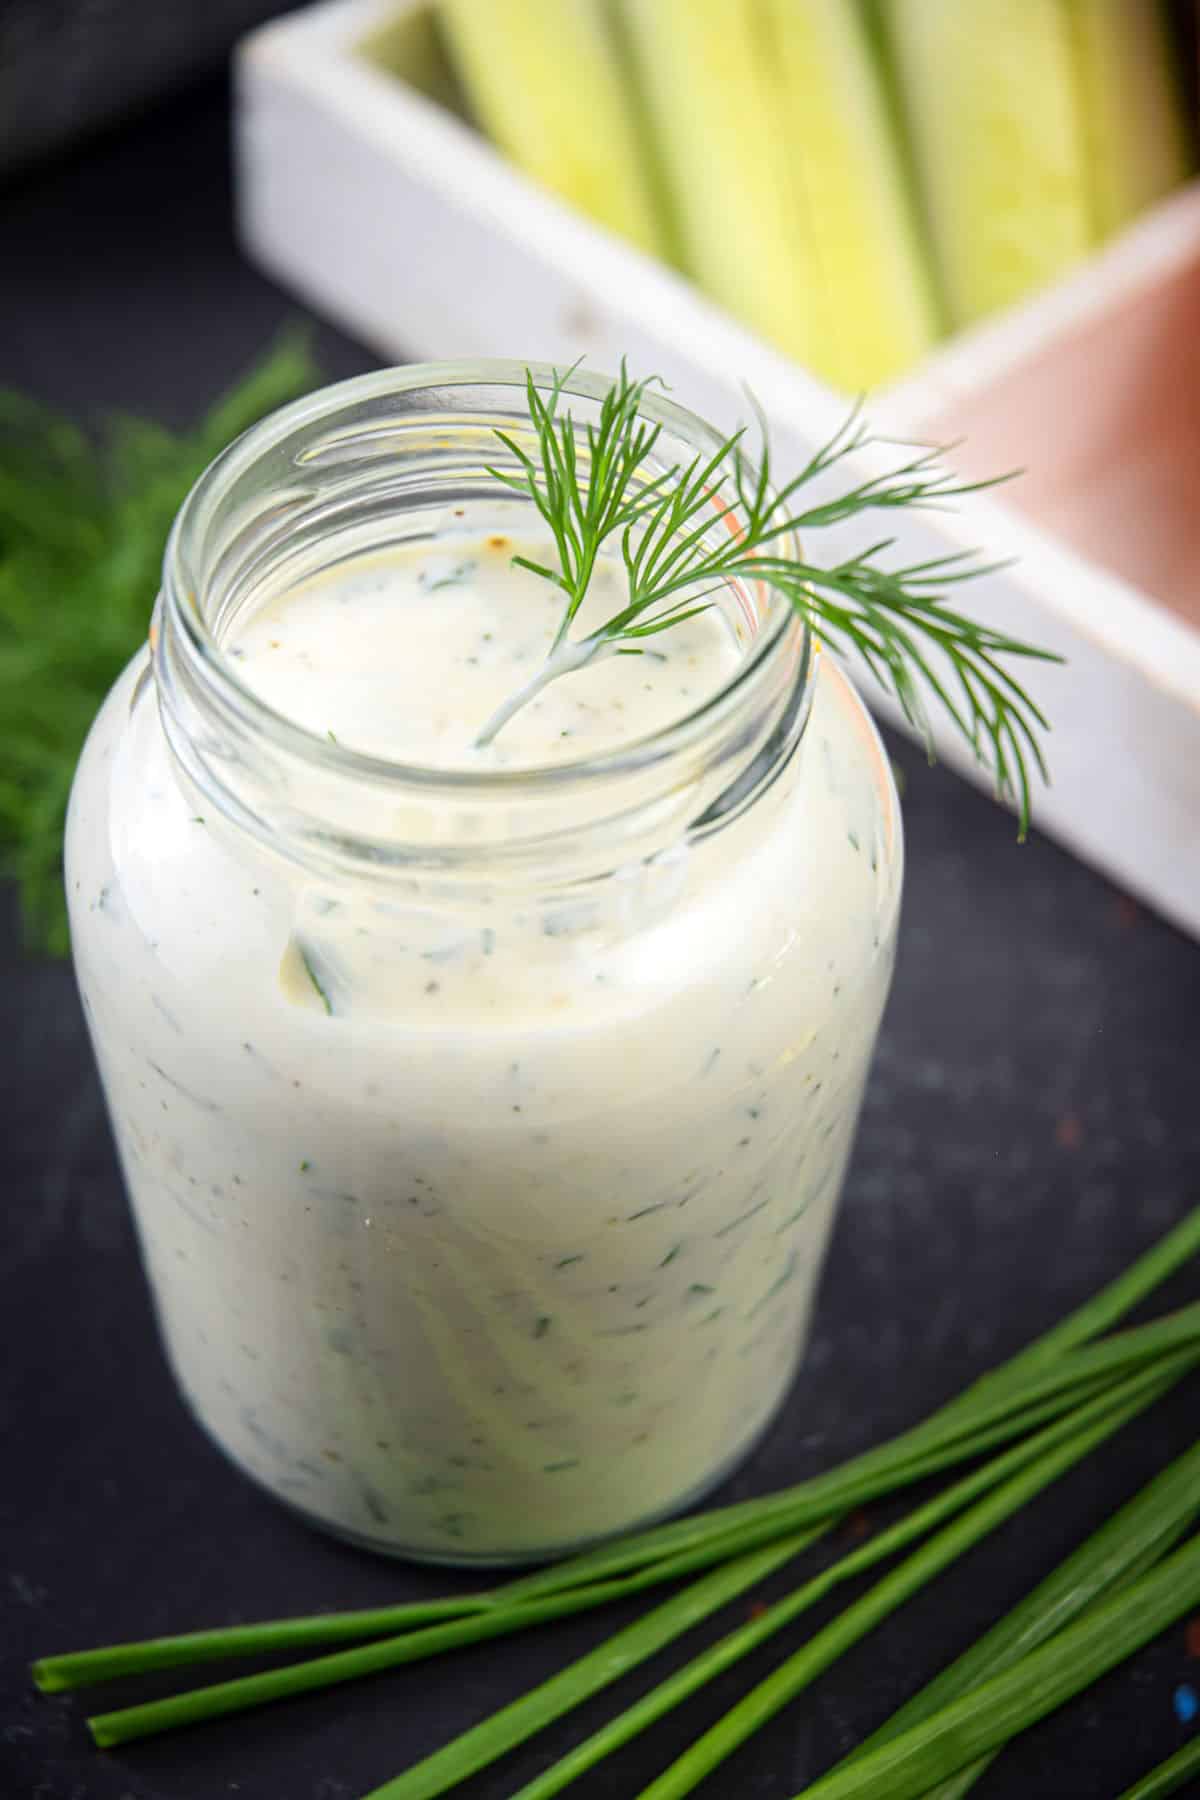 Homemade ranch dressing in a jar with fresh dill.